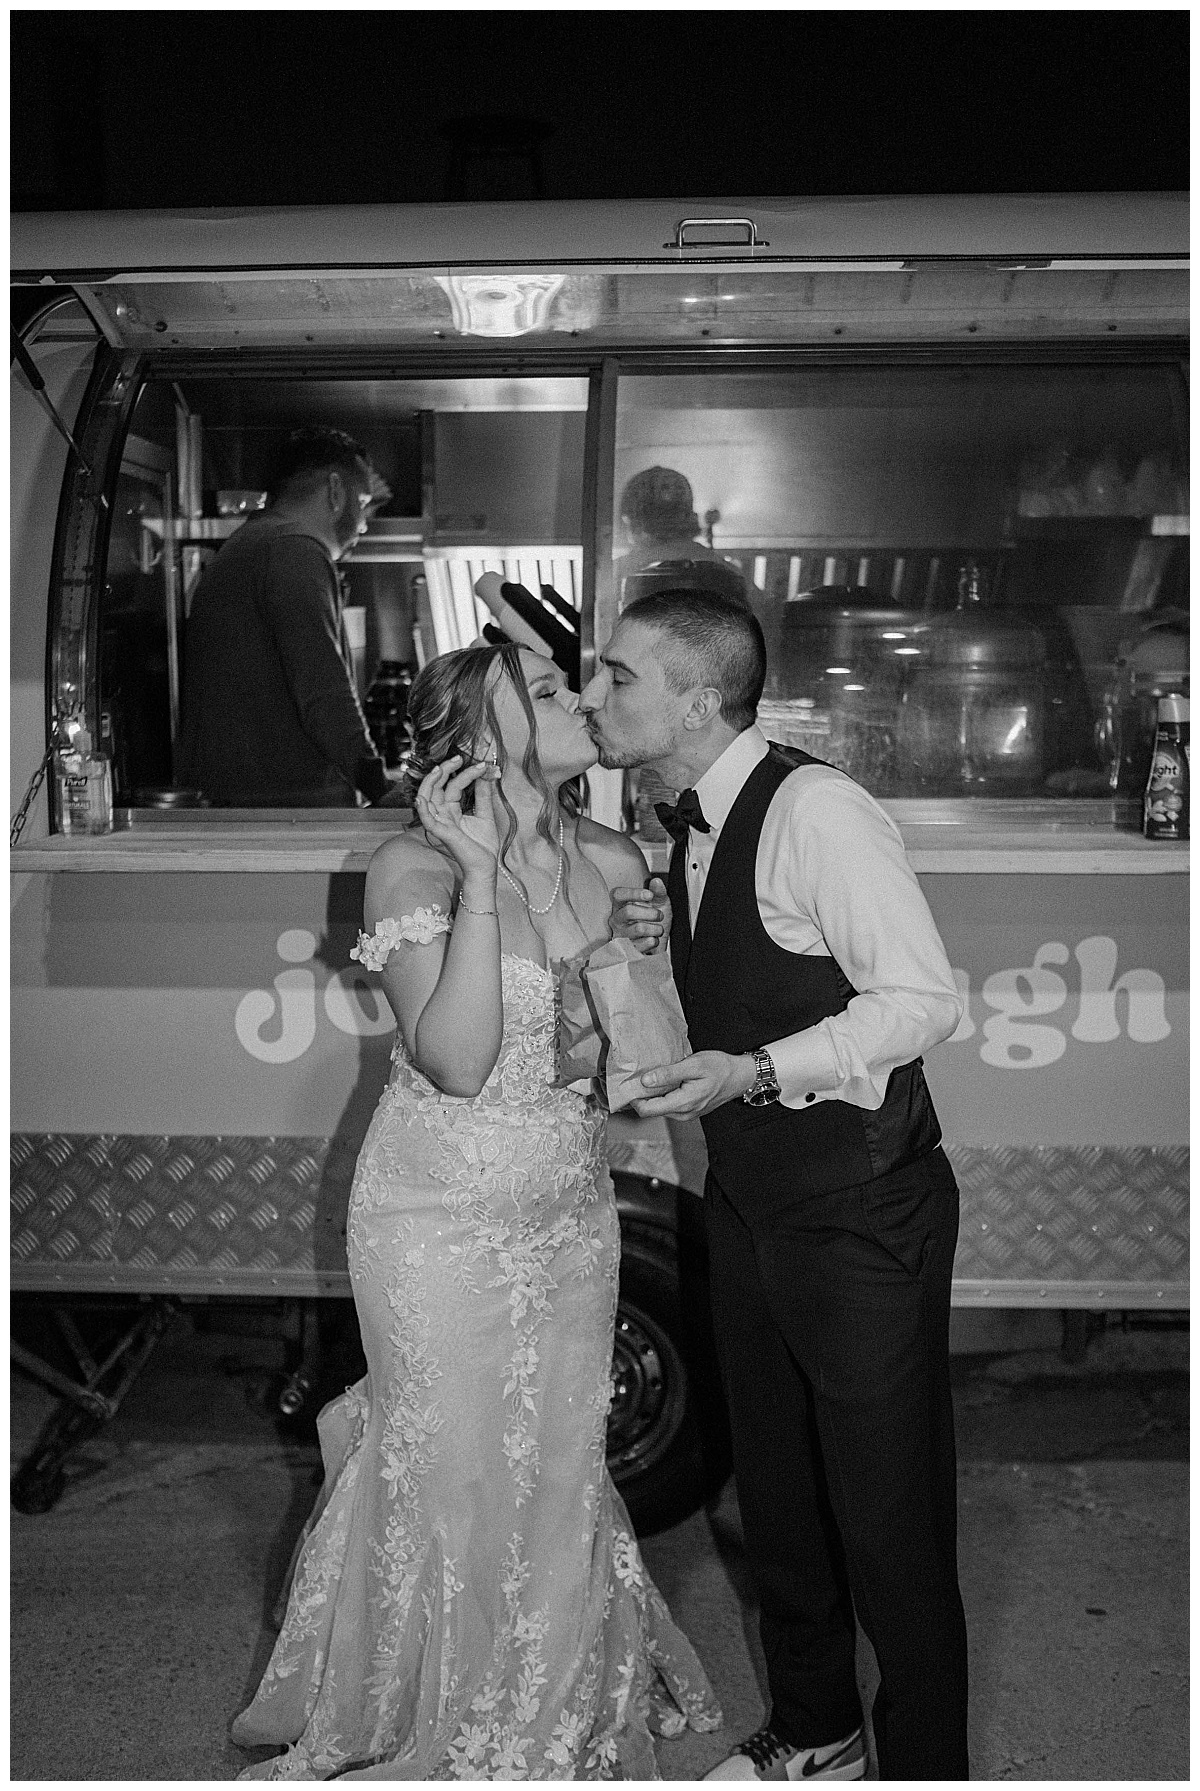 newlyweds kiss while eating donuts in front of donut cart by Chicago photographer